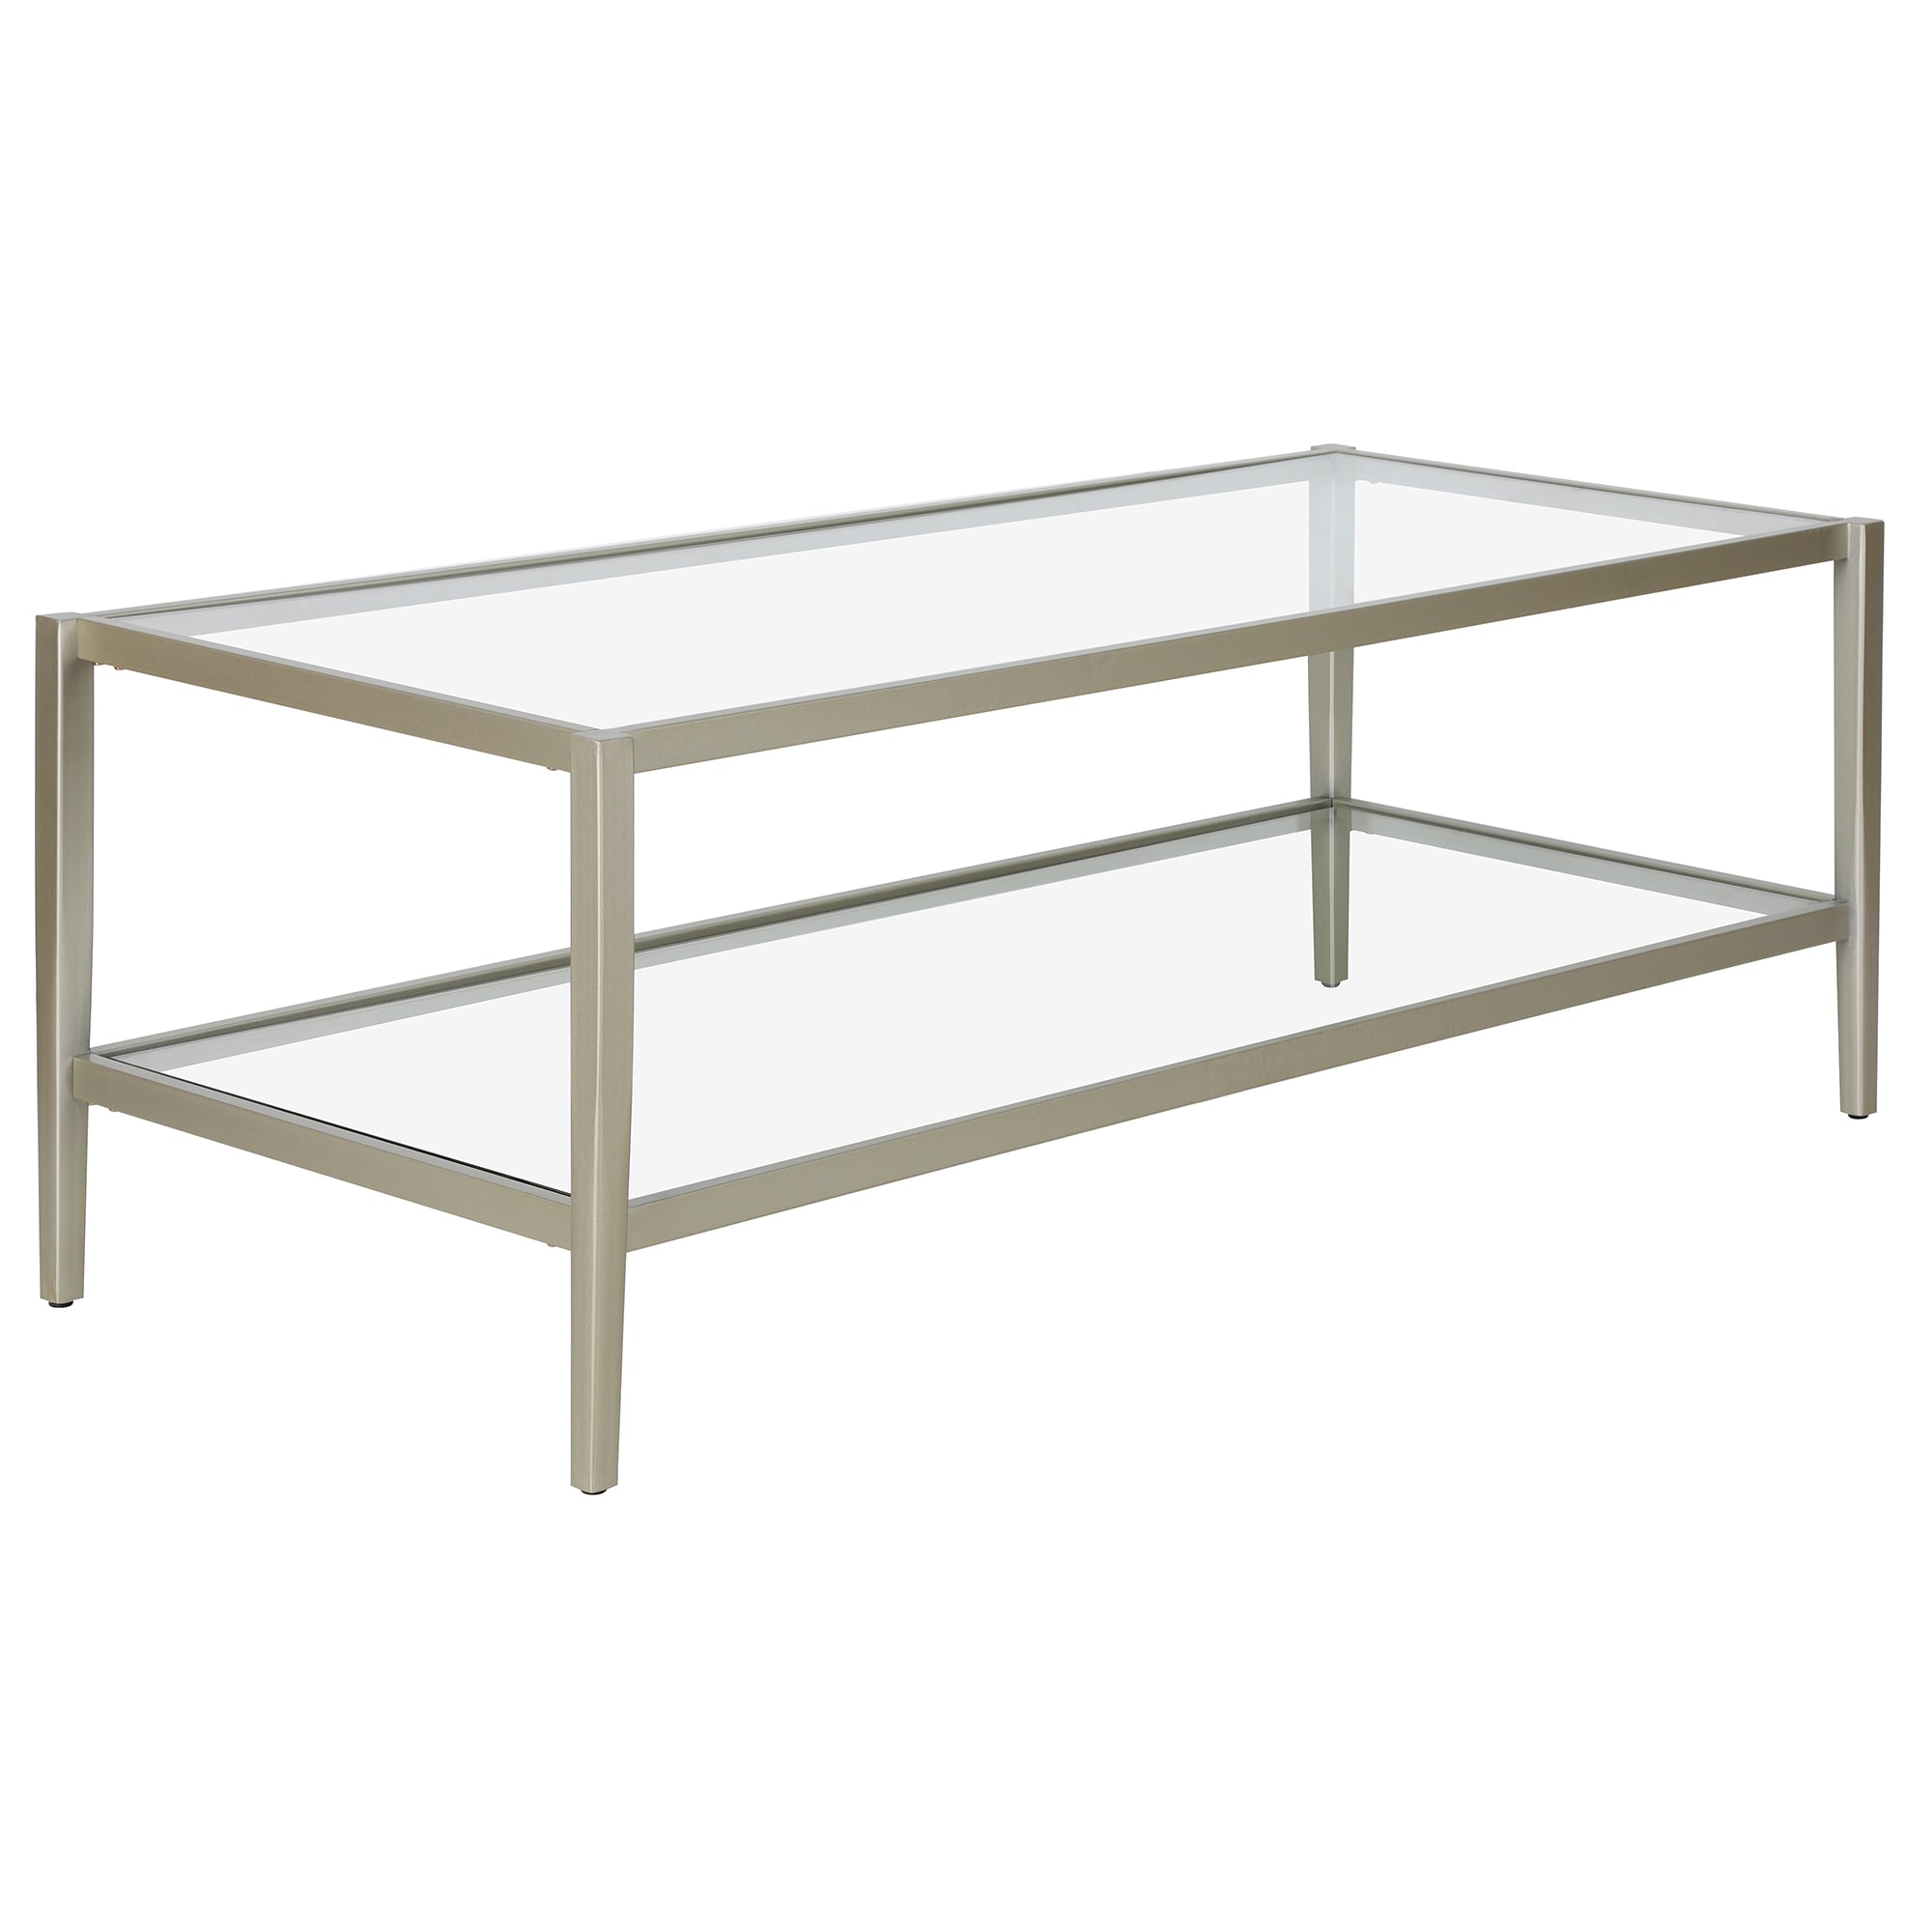 Hera Coffee Tables at Lowes.com